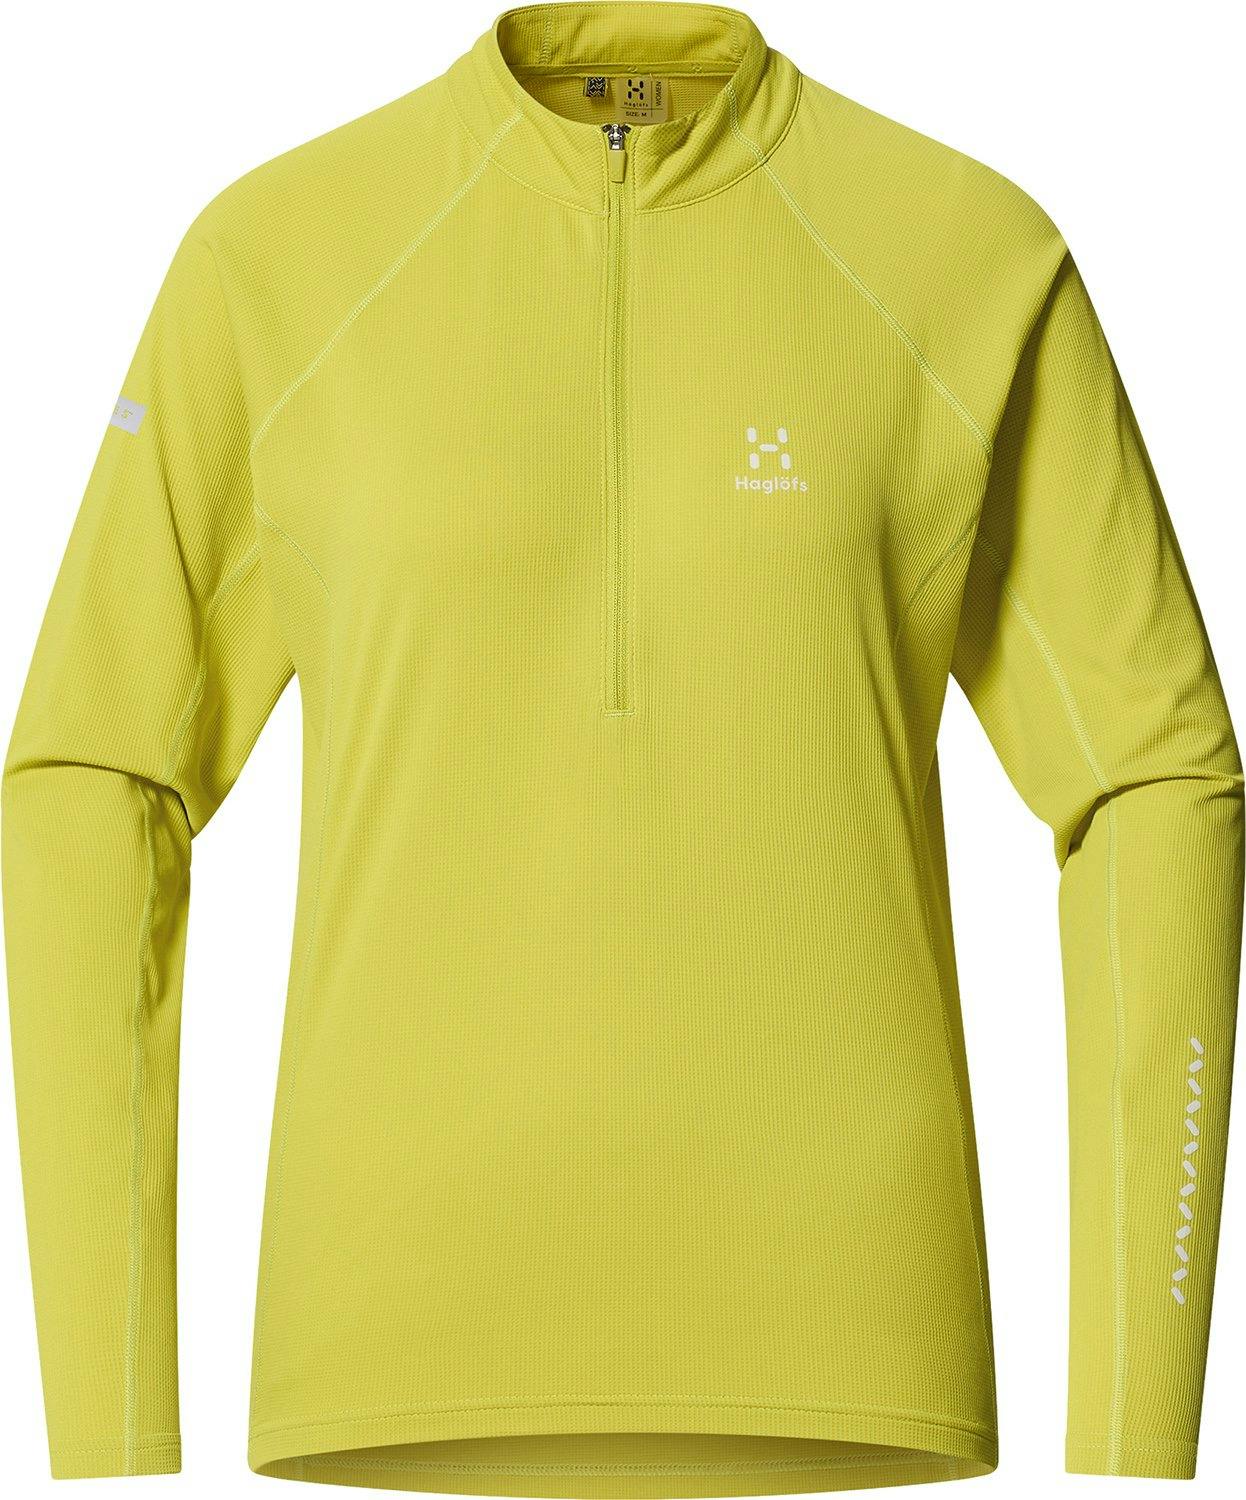 Product image for L.I.M Tempo Trail Half Zip Midlayer Top - Women's